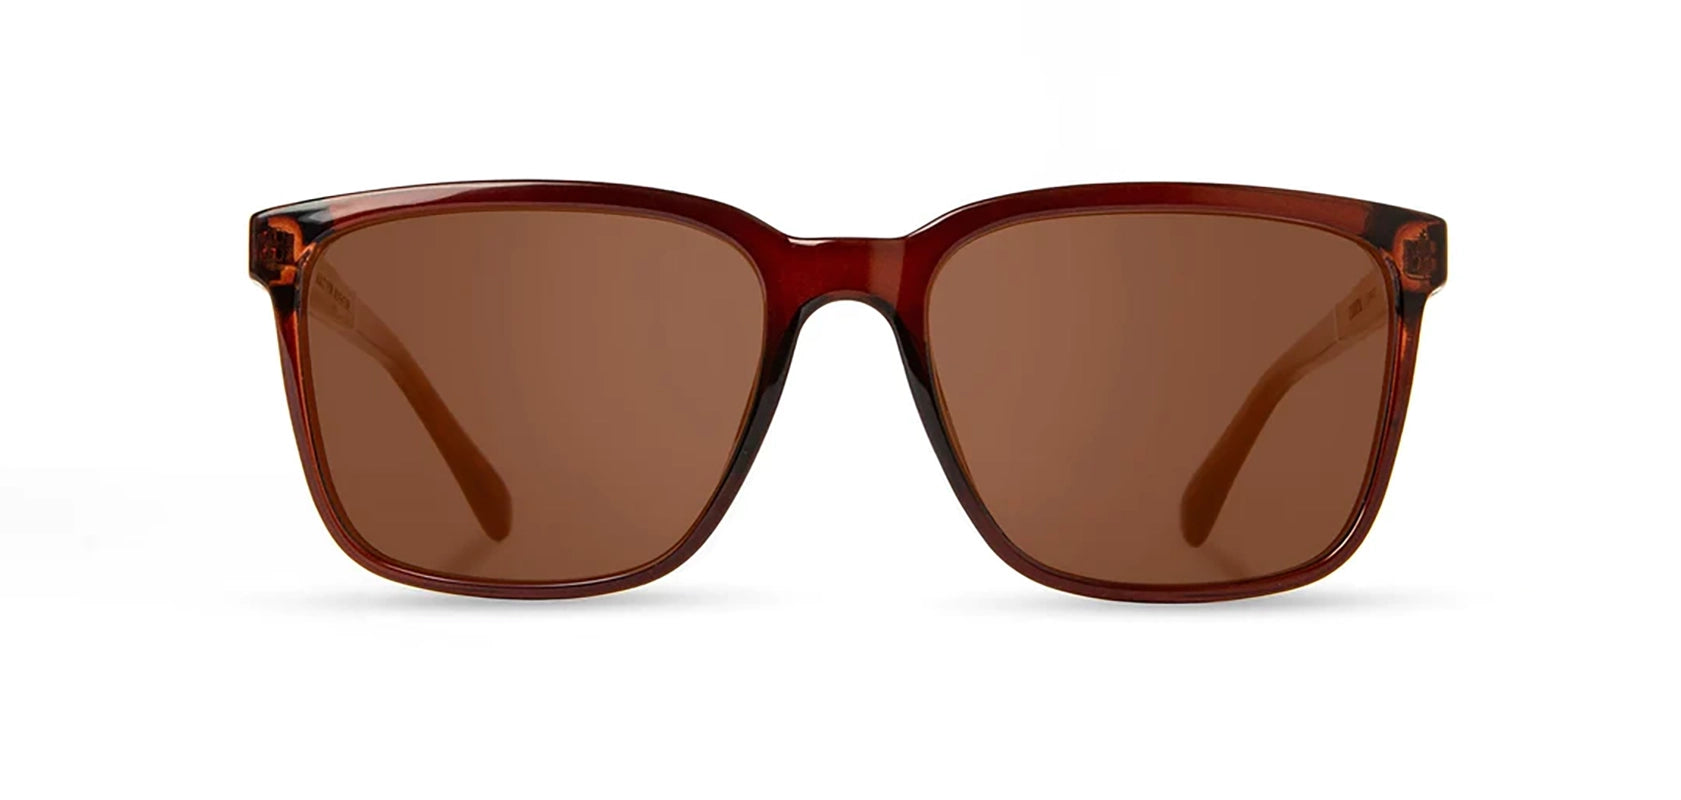 Camp Clay / Walnut Sunglasses with brown polarized Lenses front view